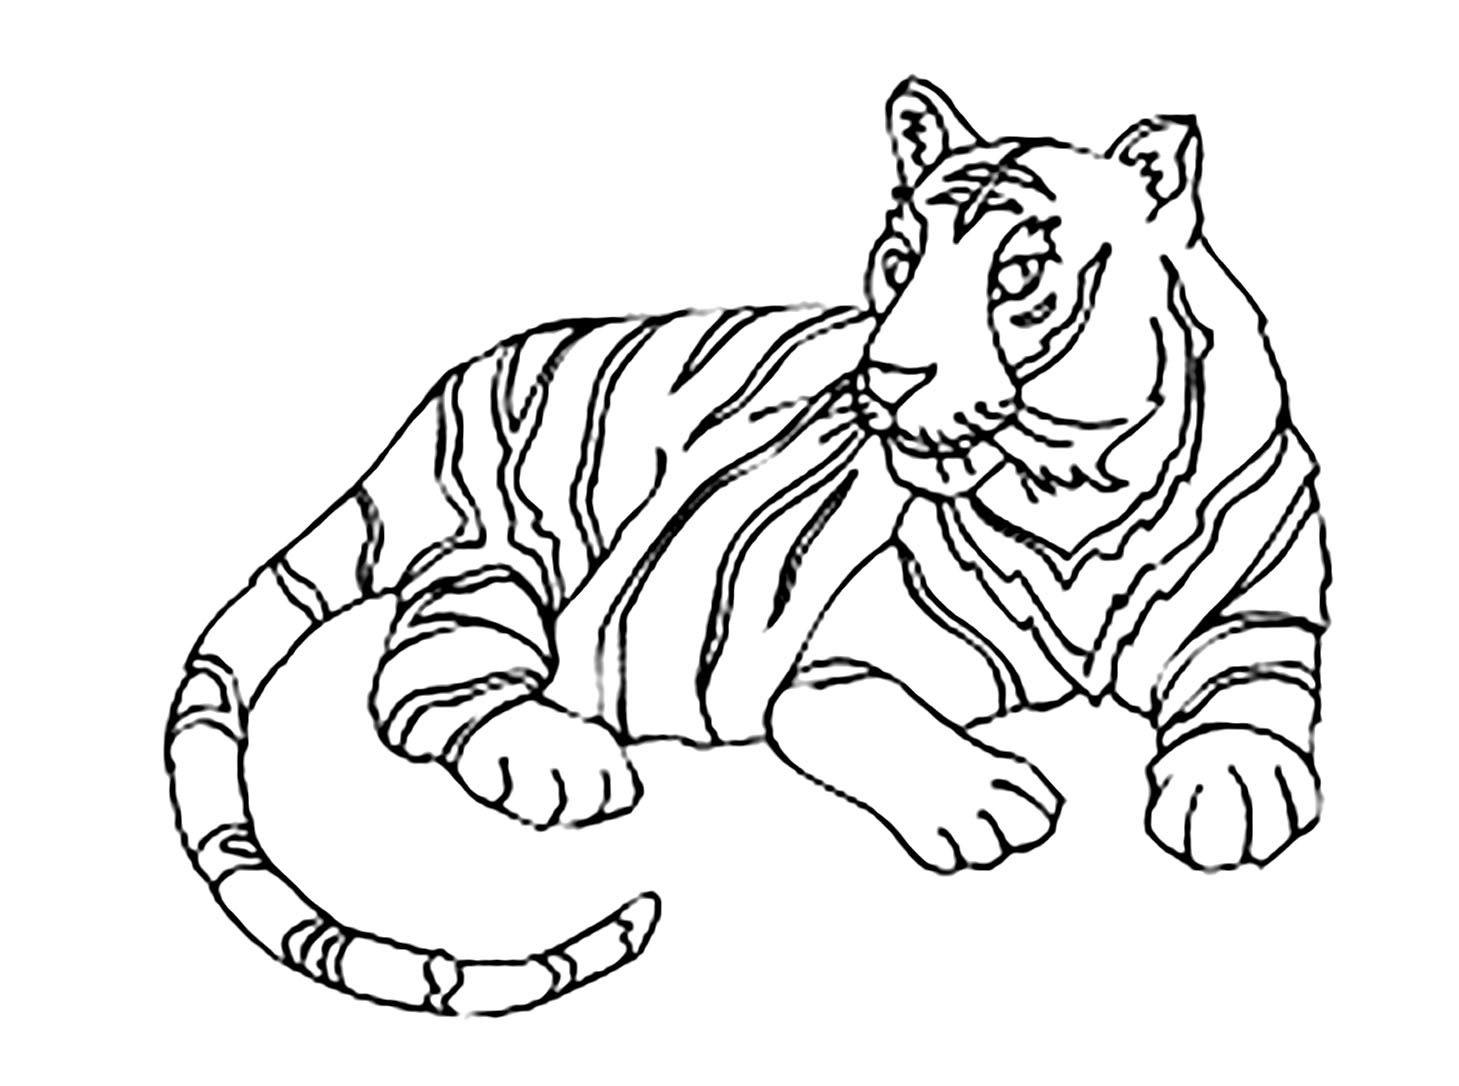 Printable Tiger Coloring Pages For Kids - Tigers Kids Coloring Pages